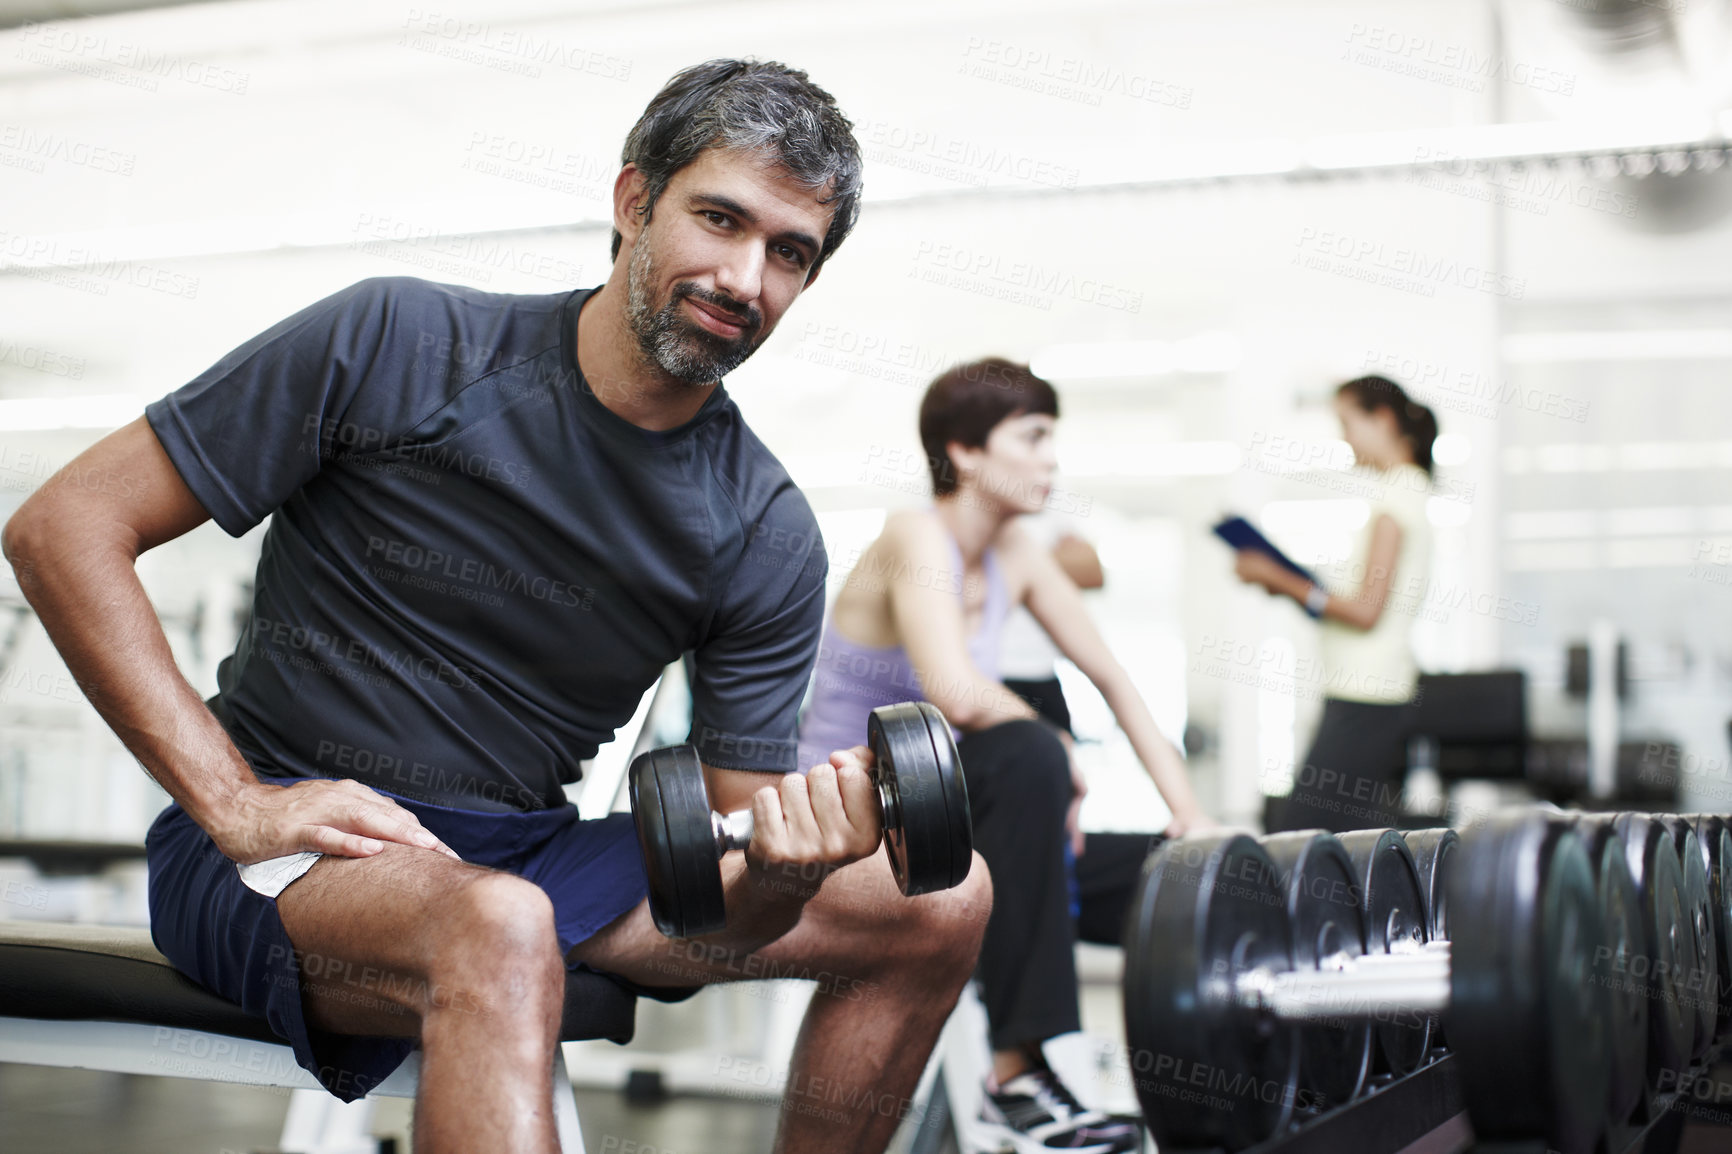 Buy stock photo Cropped portrait of a handsome young man working out with weights in the gym